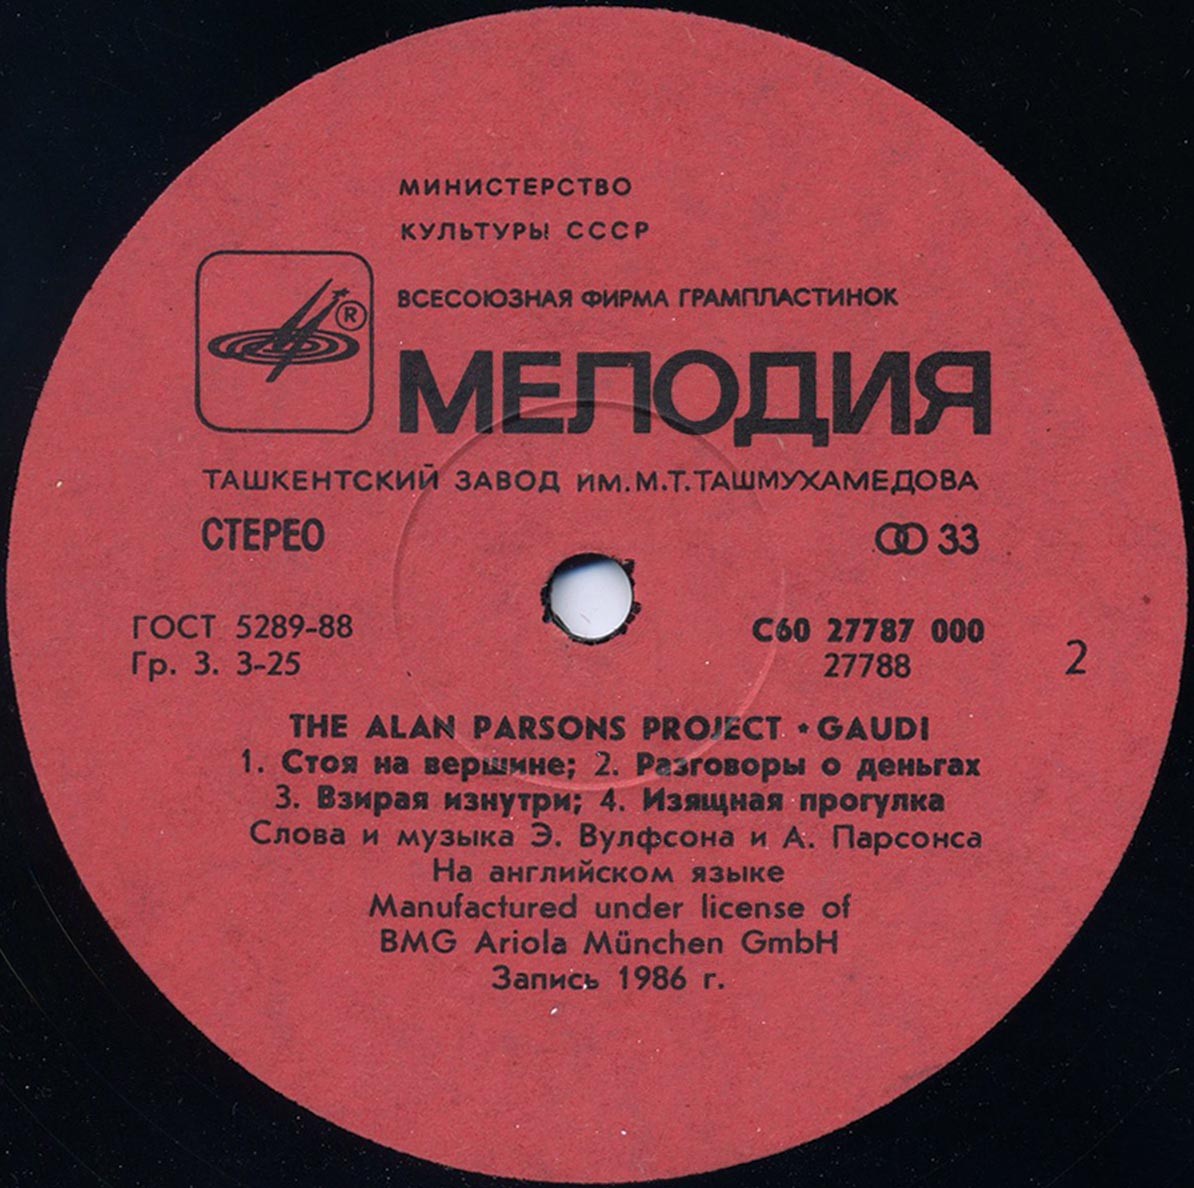 The Alan Parsons Project. Gaudi ("Гауди")